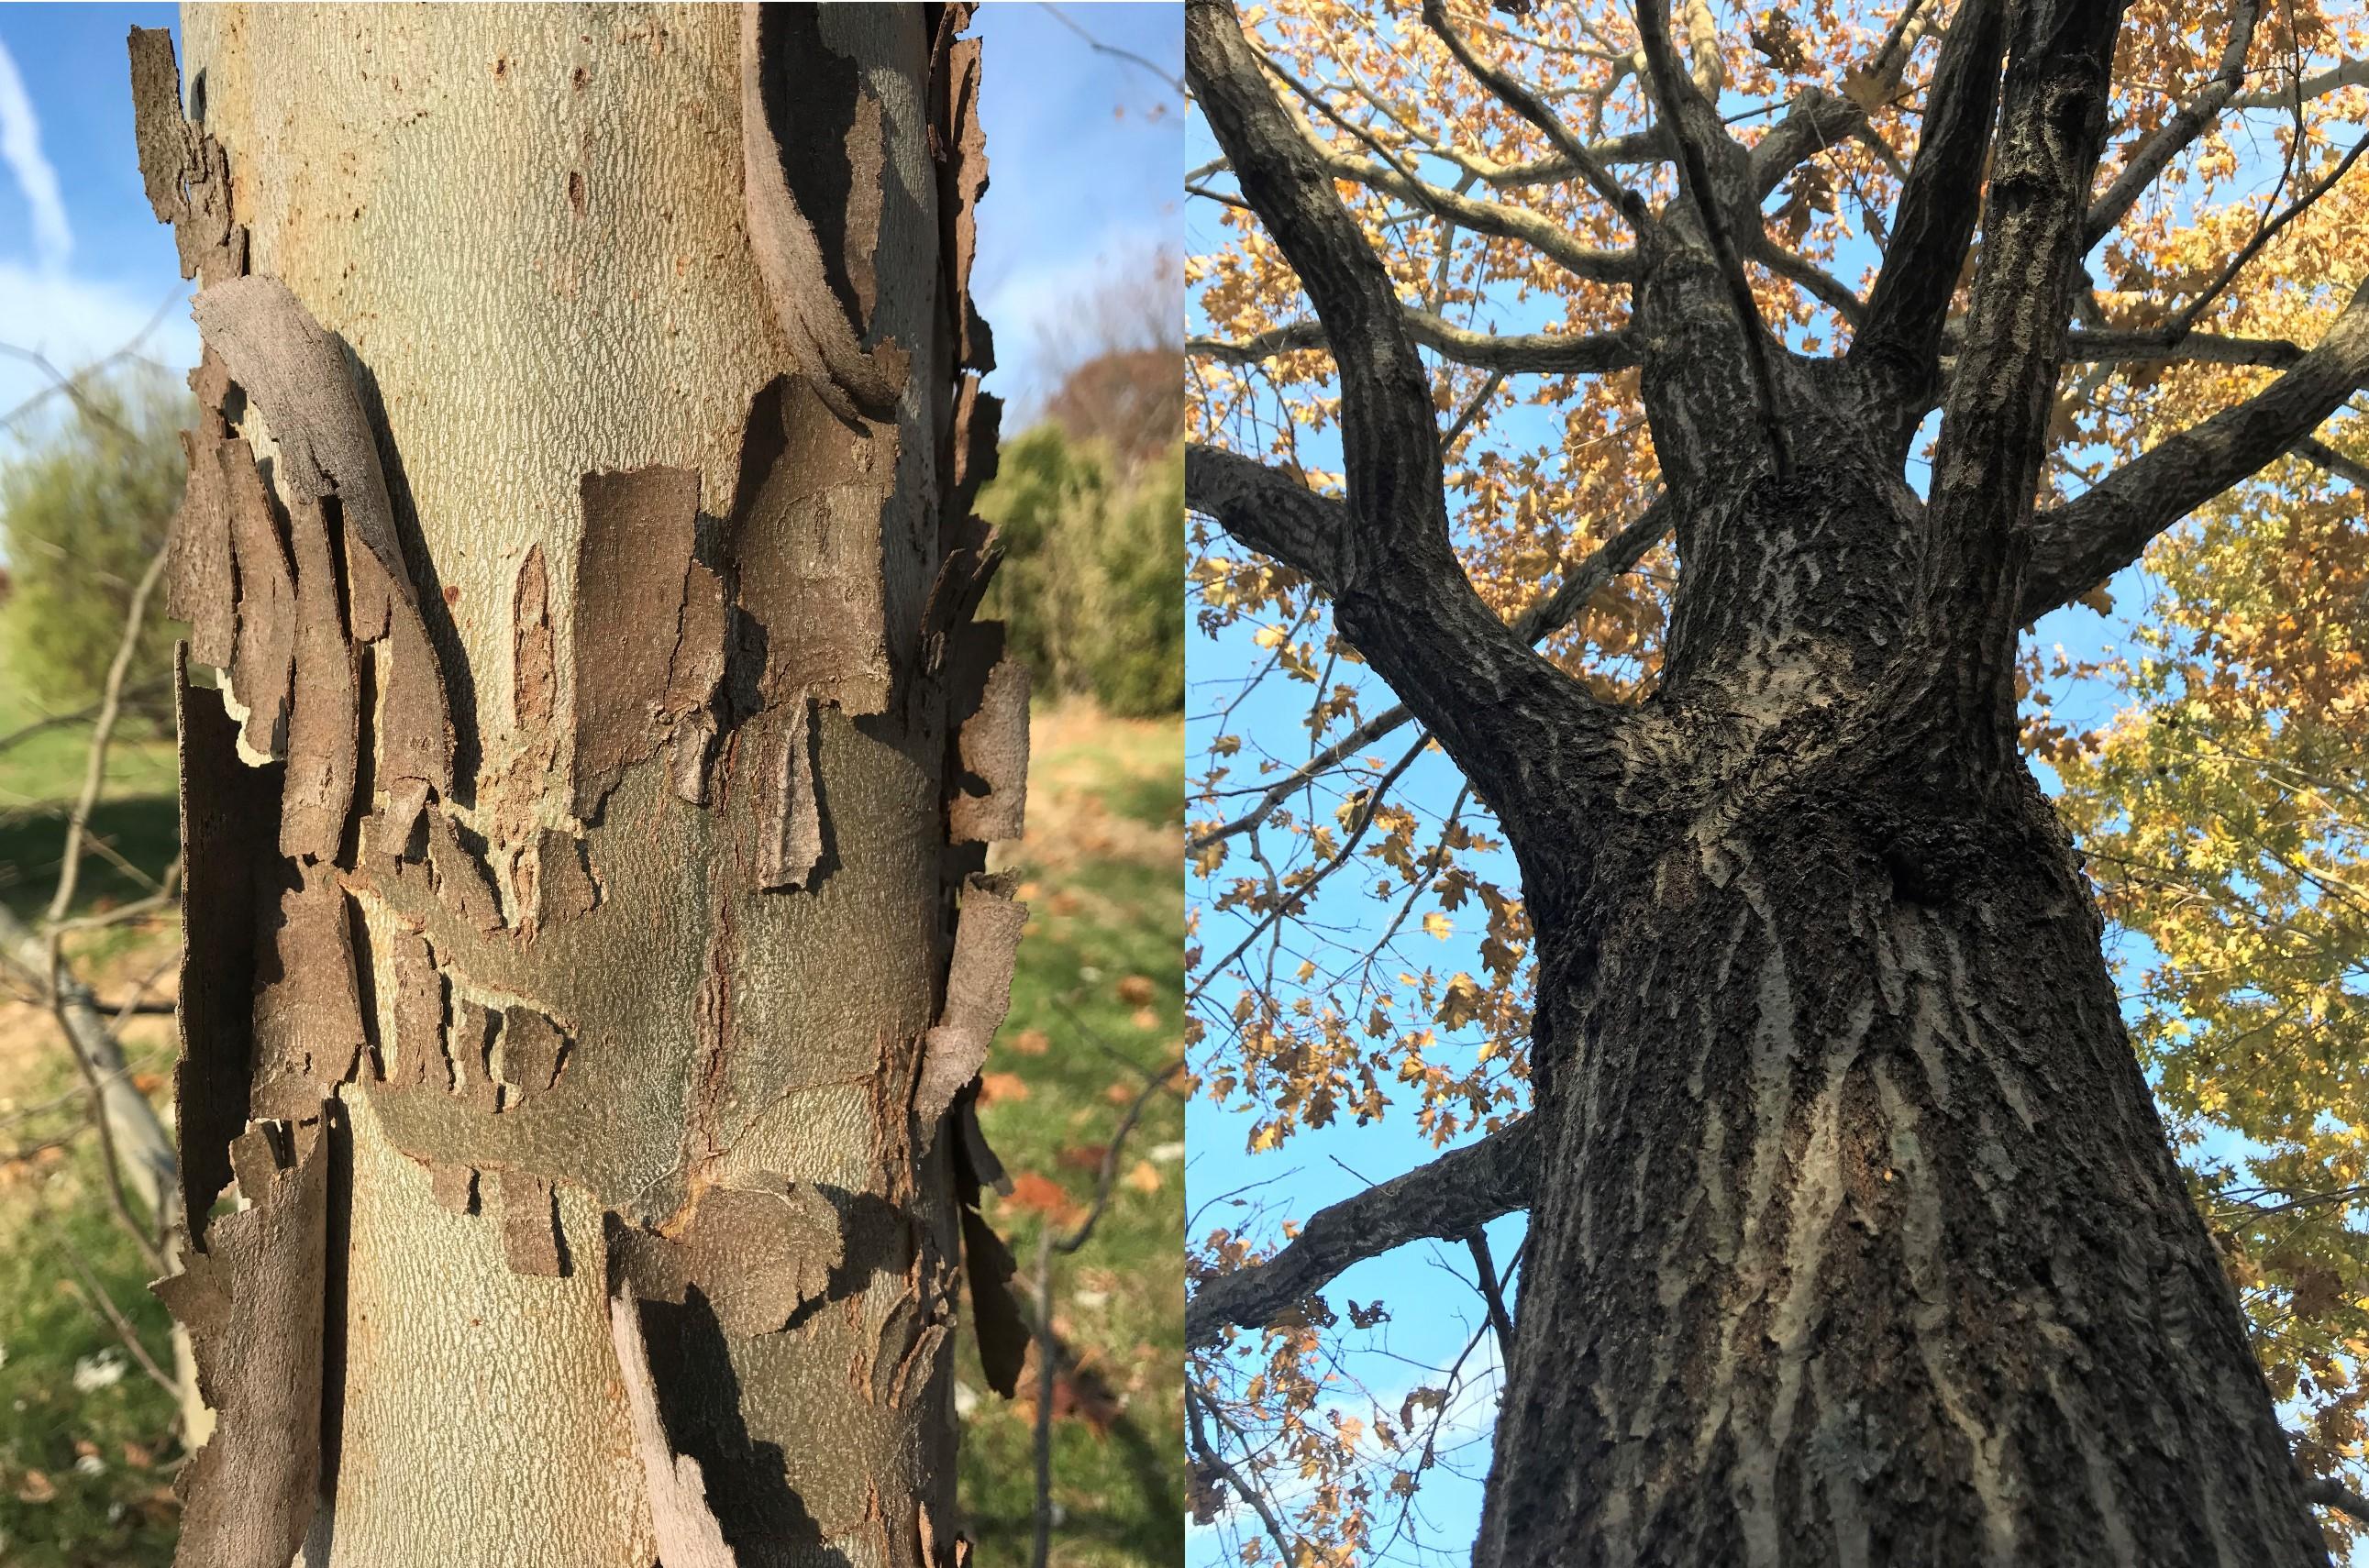 From left to right: American sycamore (Platanus occidentalis); Northern red oak (Quercus rubra).